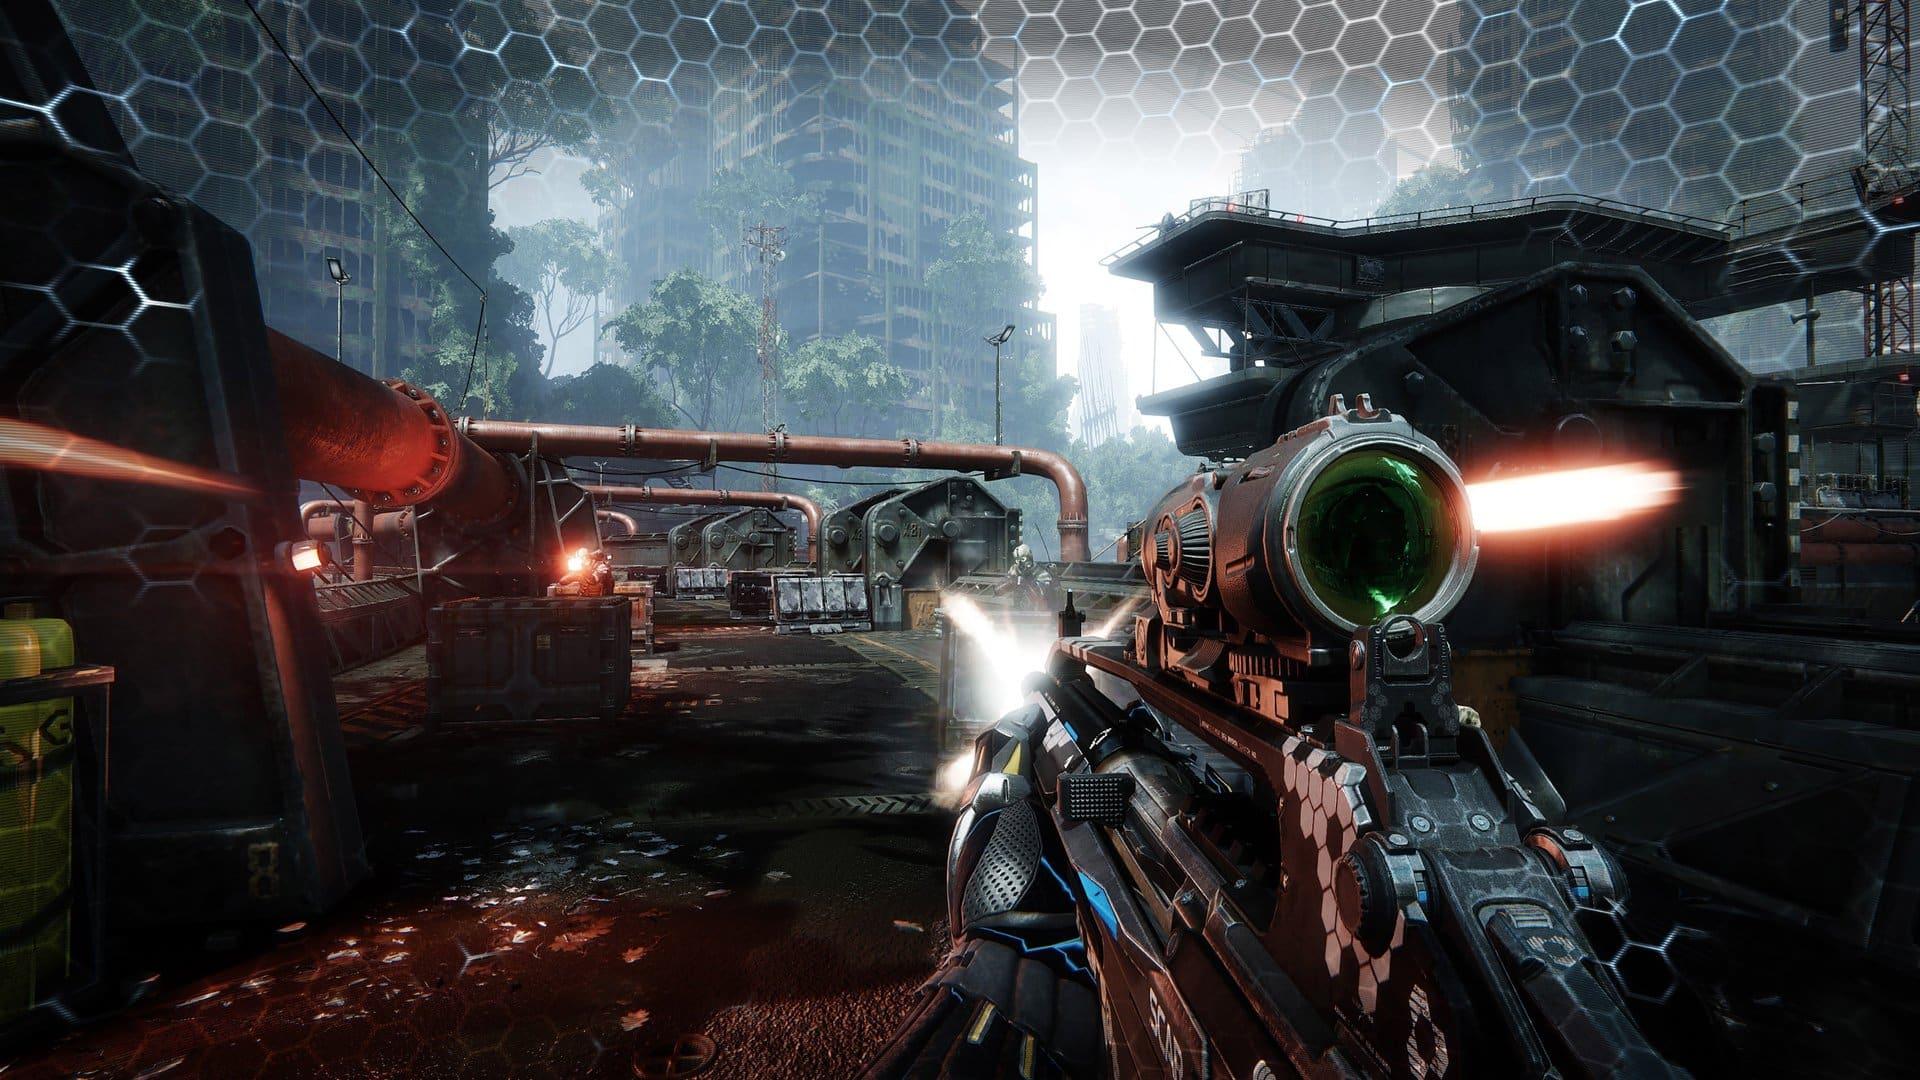 Crysis Remastered Trilogy screenshot showing the player fighting enemies in New York